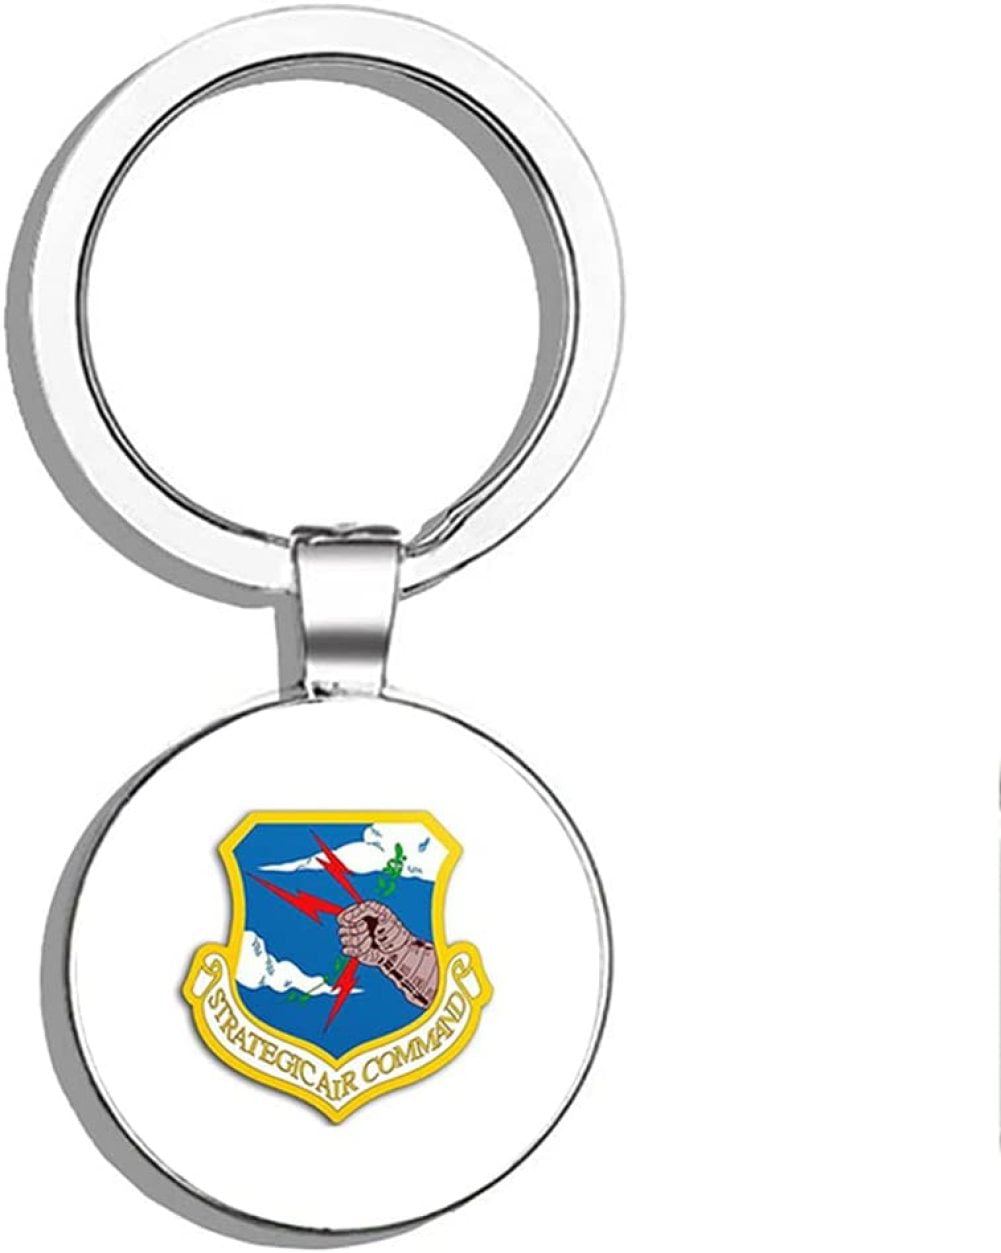 United States Air Force USAF Retired Leather Key Ring Keychain H15039LBK D218 